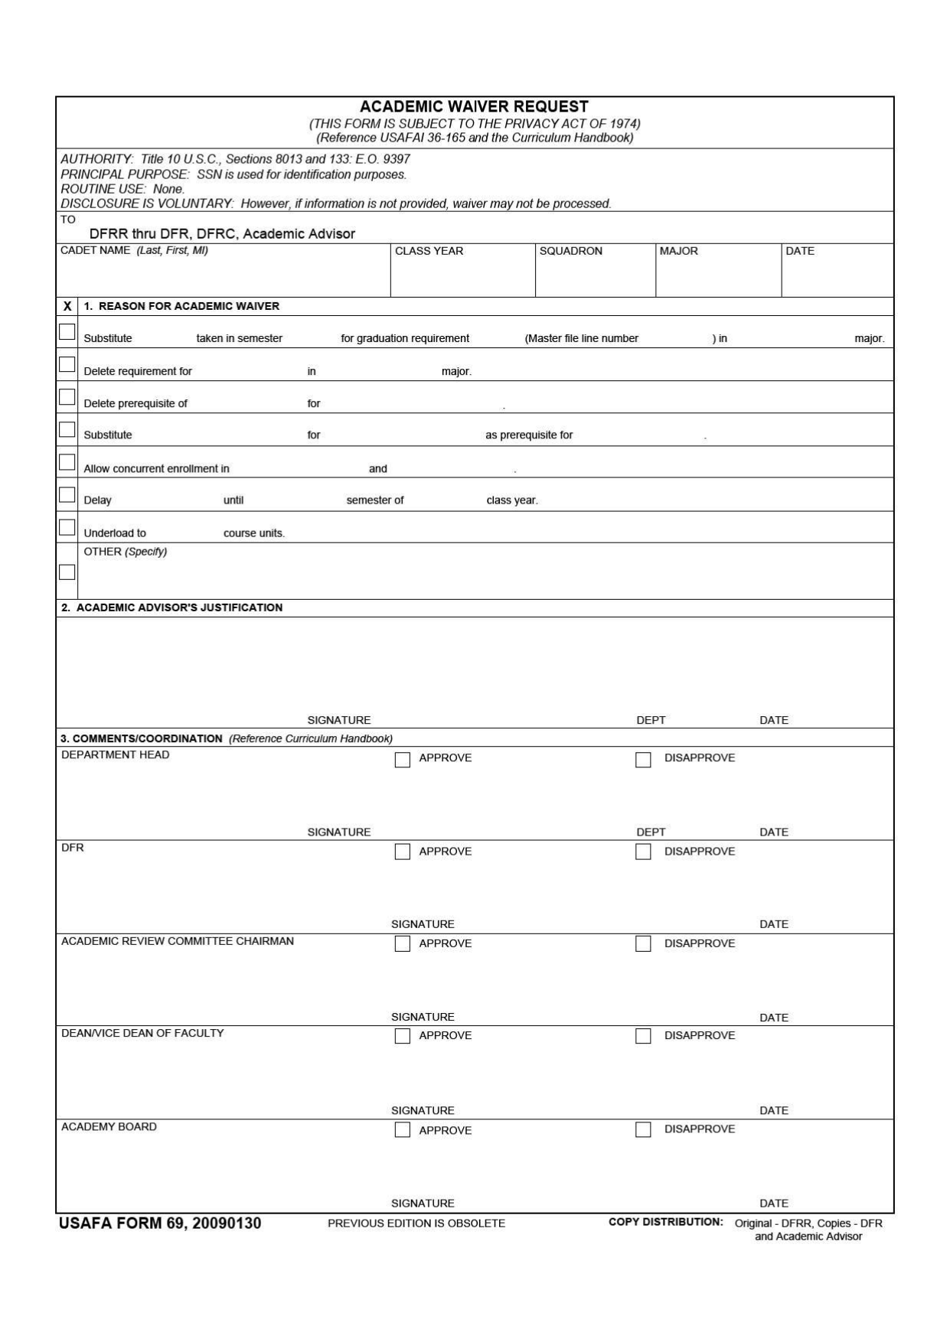 USAFA Form 69 Academic Waiver Request, Page 1